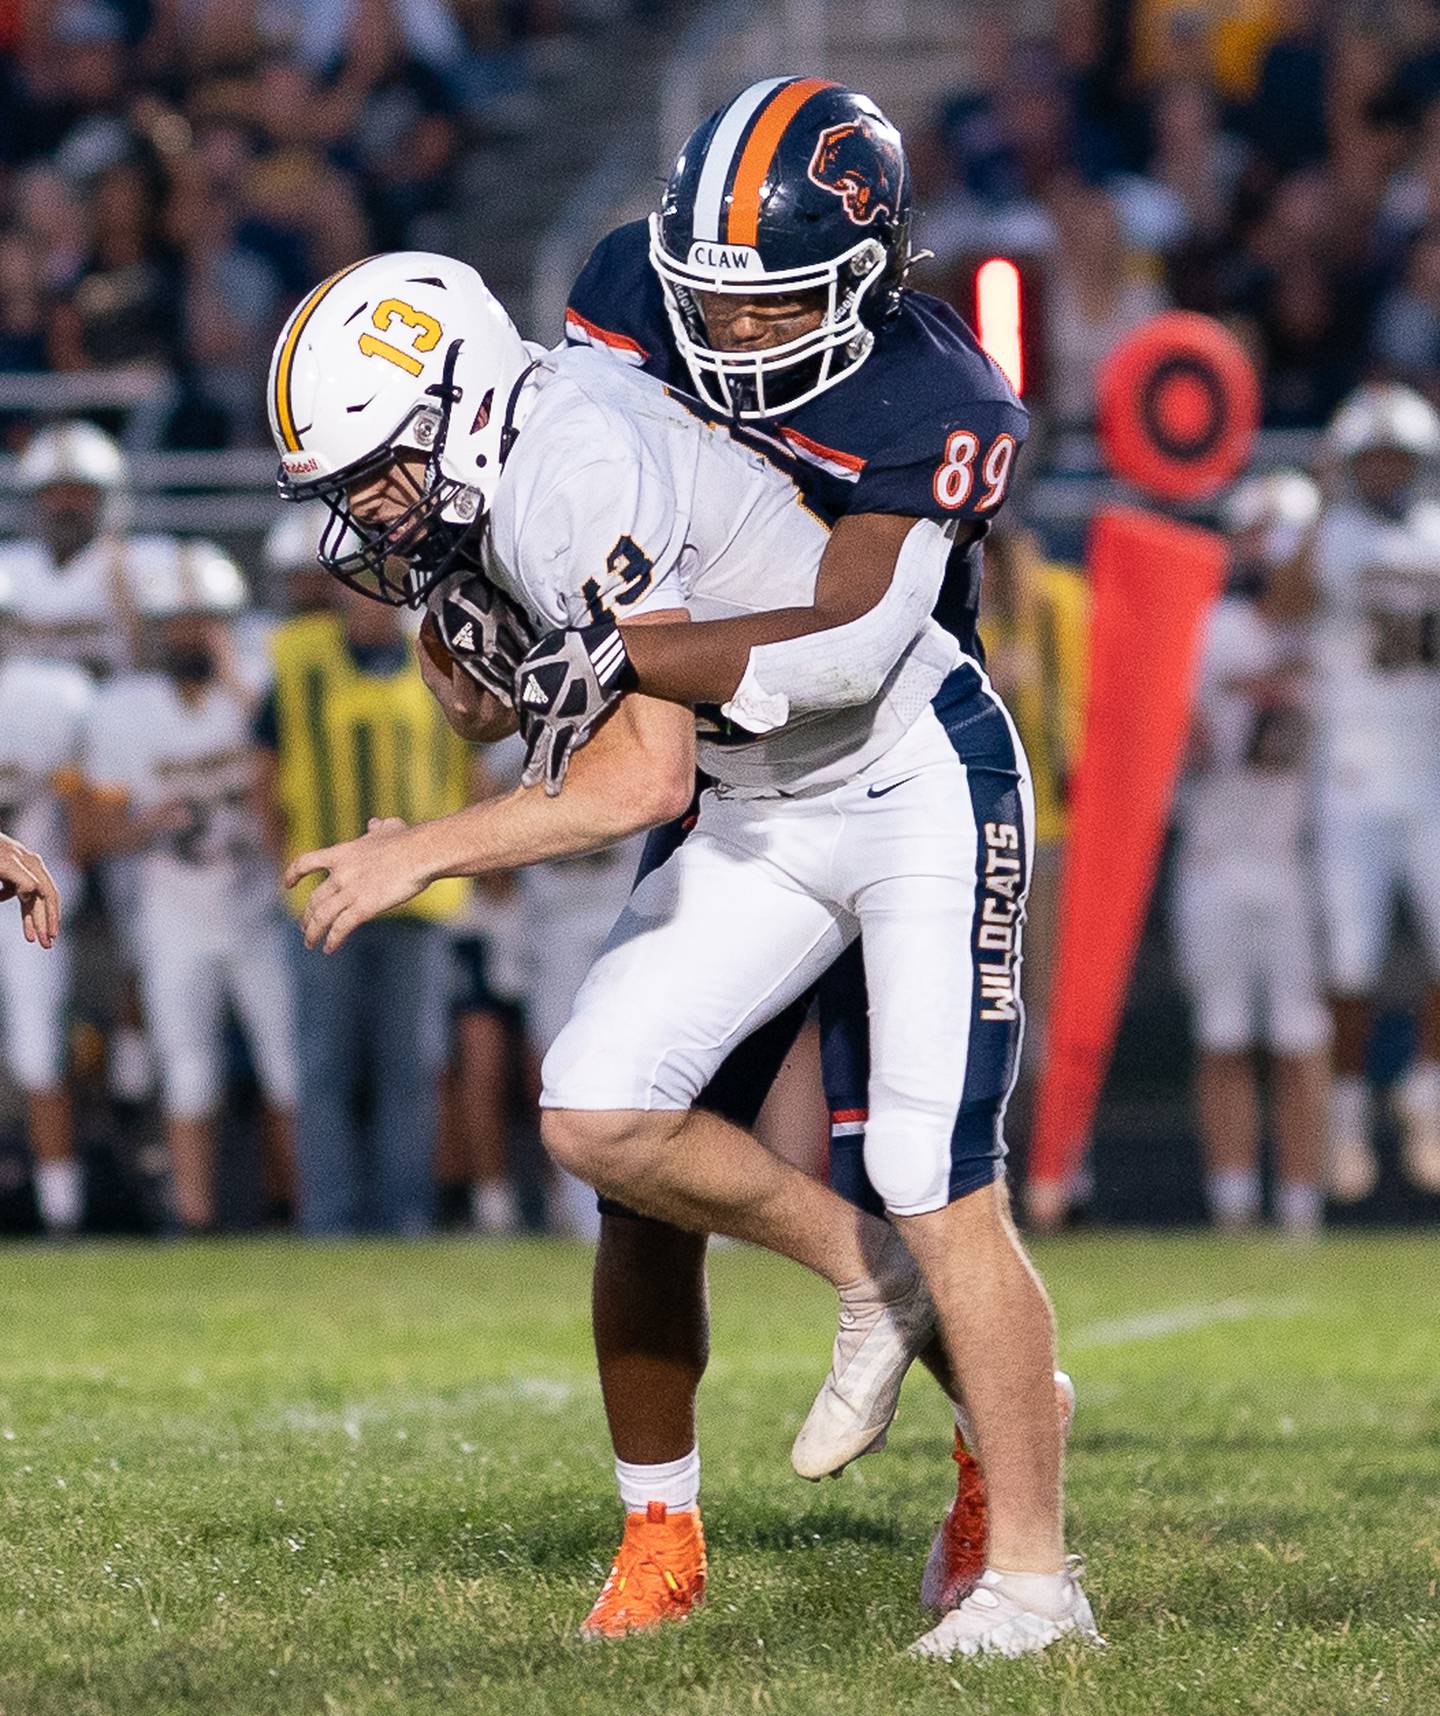 Neuqua Valley's Mark Mennecke (13) is tackled in the backfield by Oswego’s Taiden Thomas (89) during a football game at Oswego High School on Friday, Aug 26, 2022.